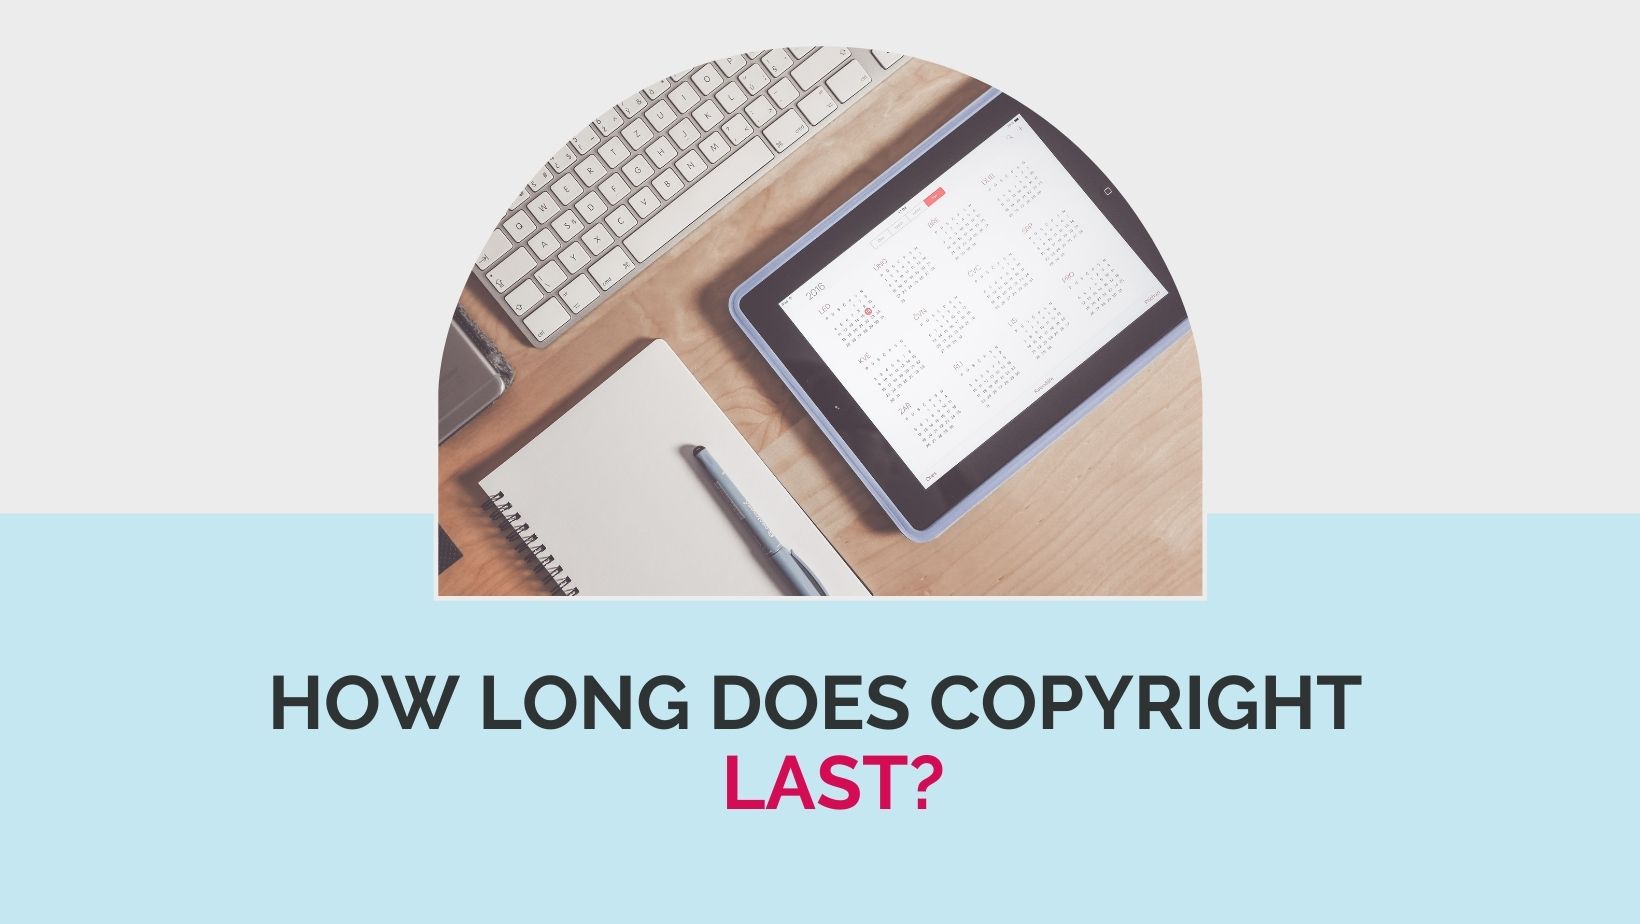 how long does copyright last?